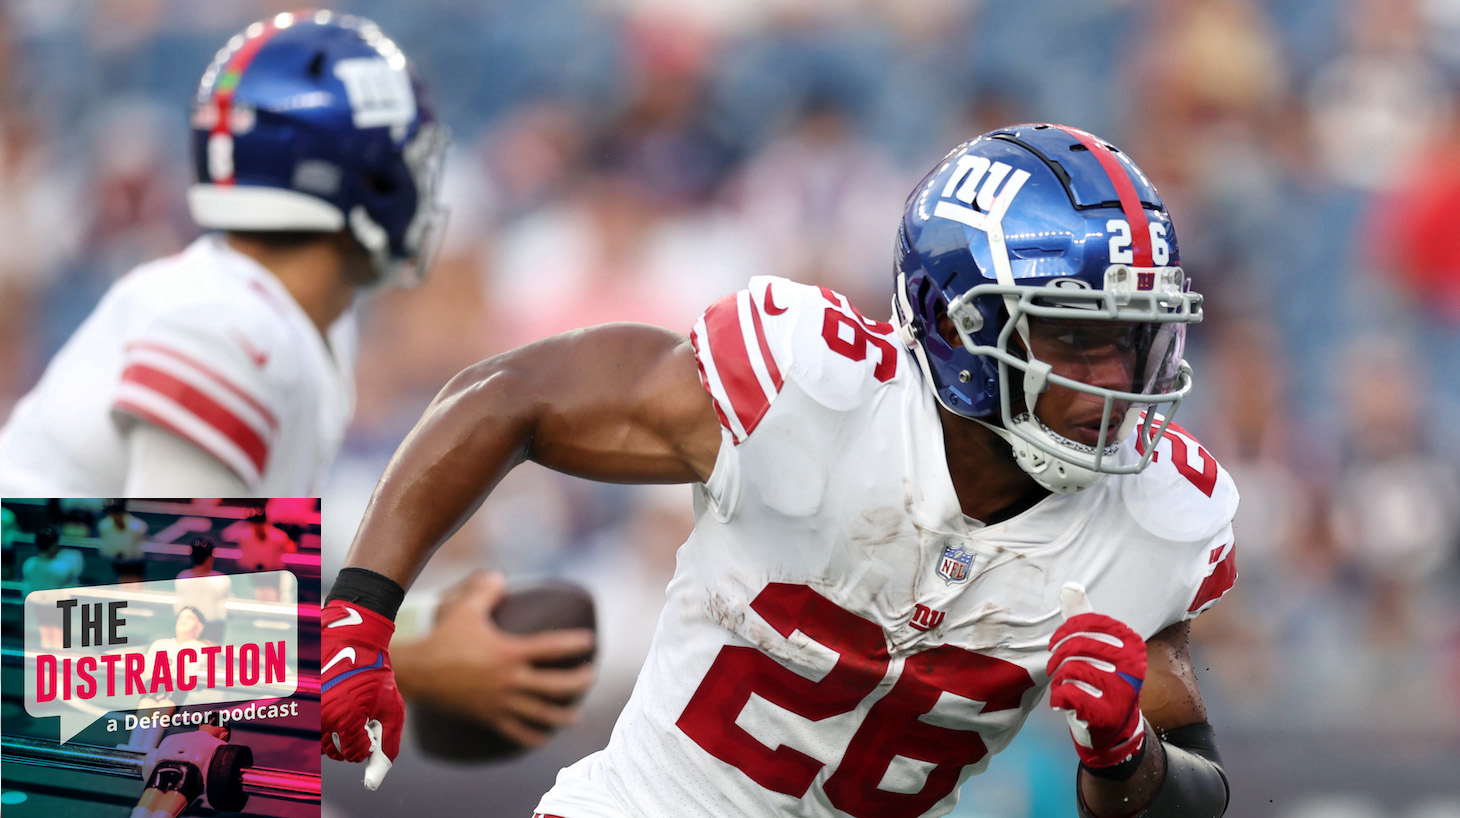 FOXBOROUGH, MASSACHUSETTS - AUGUST 11: Saquon Barkley #26 of the New York Giants makes a run during the preseason game between the New York Giants and the New England Patriots at Gillette Stadium on August 11, 2022 in Foxborough, Massachusetts. (Photo by Maddie Meyer/Getty Images)